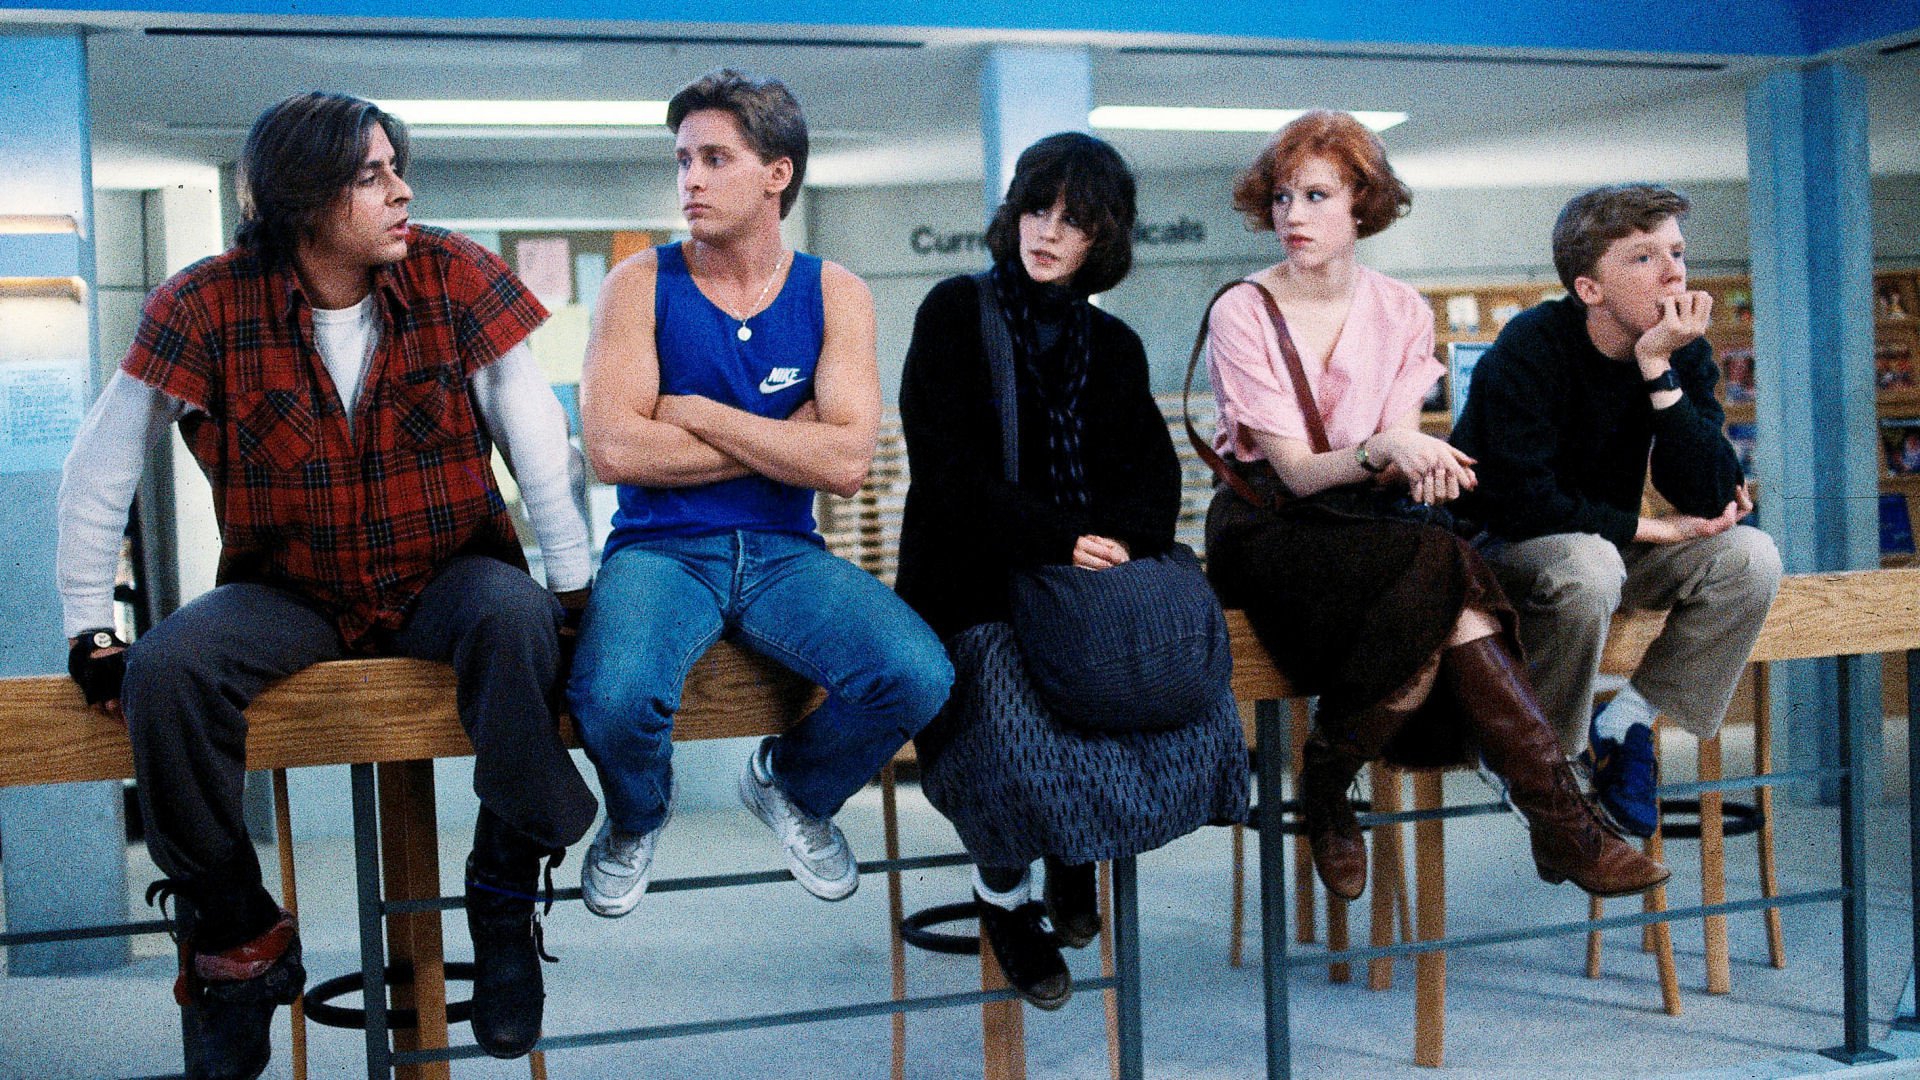 The Breakfast Club Soundtrack Music - Complete Song List | Tunefind